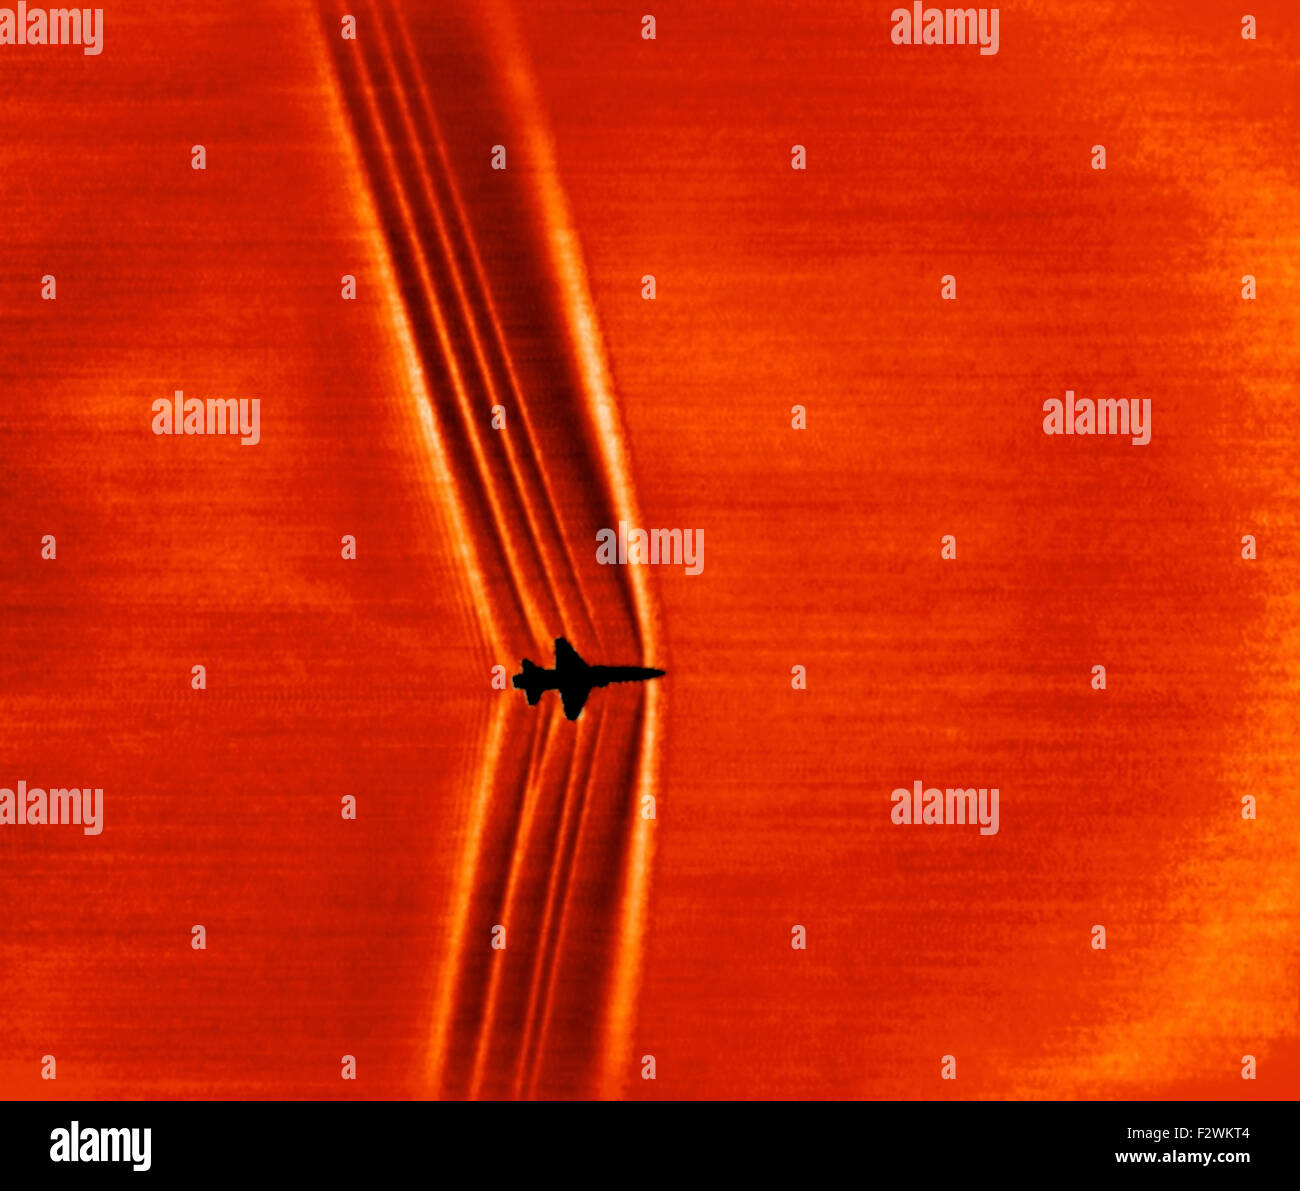 Supersonic shockwave image released by NASA. 23 September 2015. This schlieren image of a T-38C was captured using the patent-pending BOSCO technique and then processed with NASA-developed code to reveal shock wave structures.  A high resolution and enhanced version of original NASA imagery. Credit:  NASA/J Marshall - Tribaleye Images/Alamy Live News Stock Photo